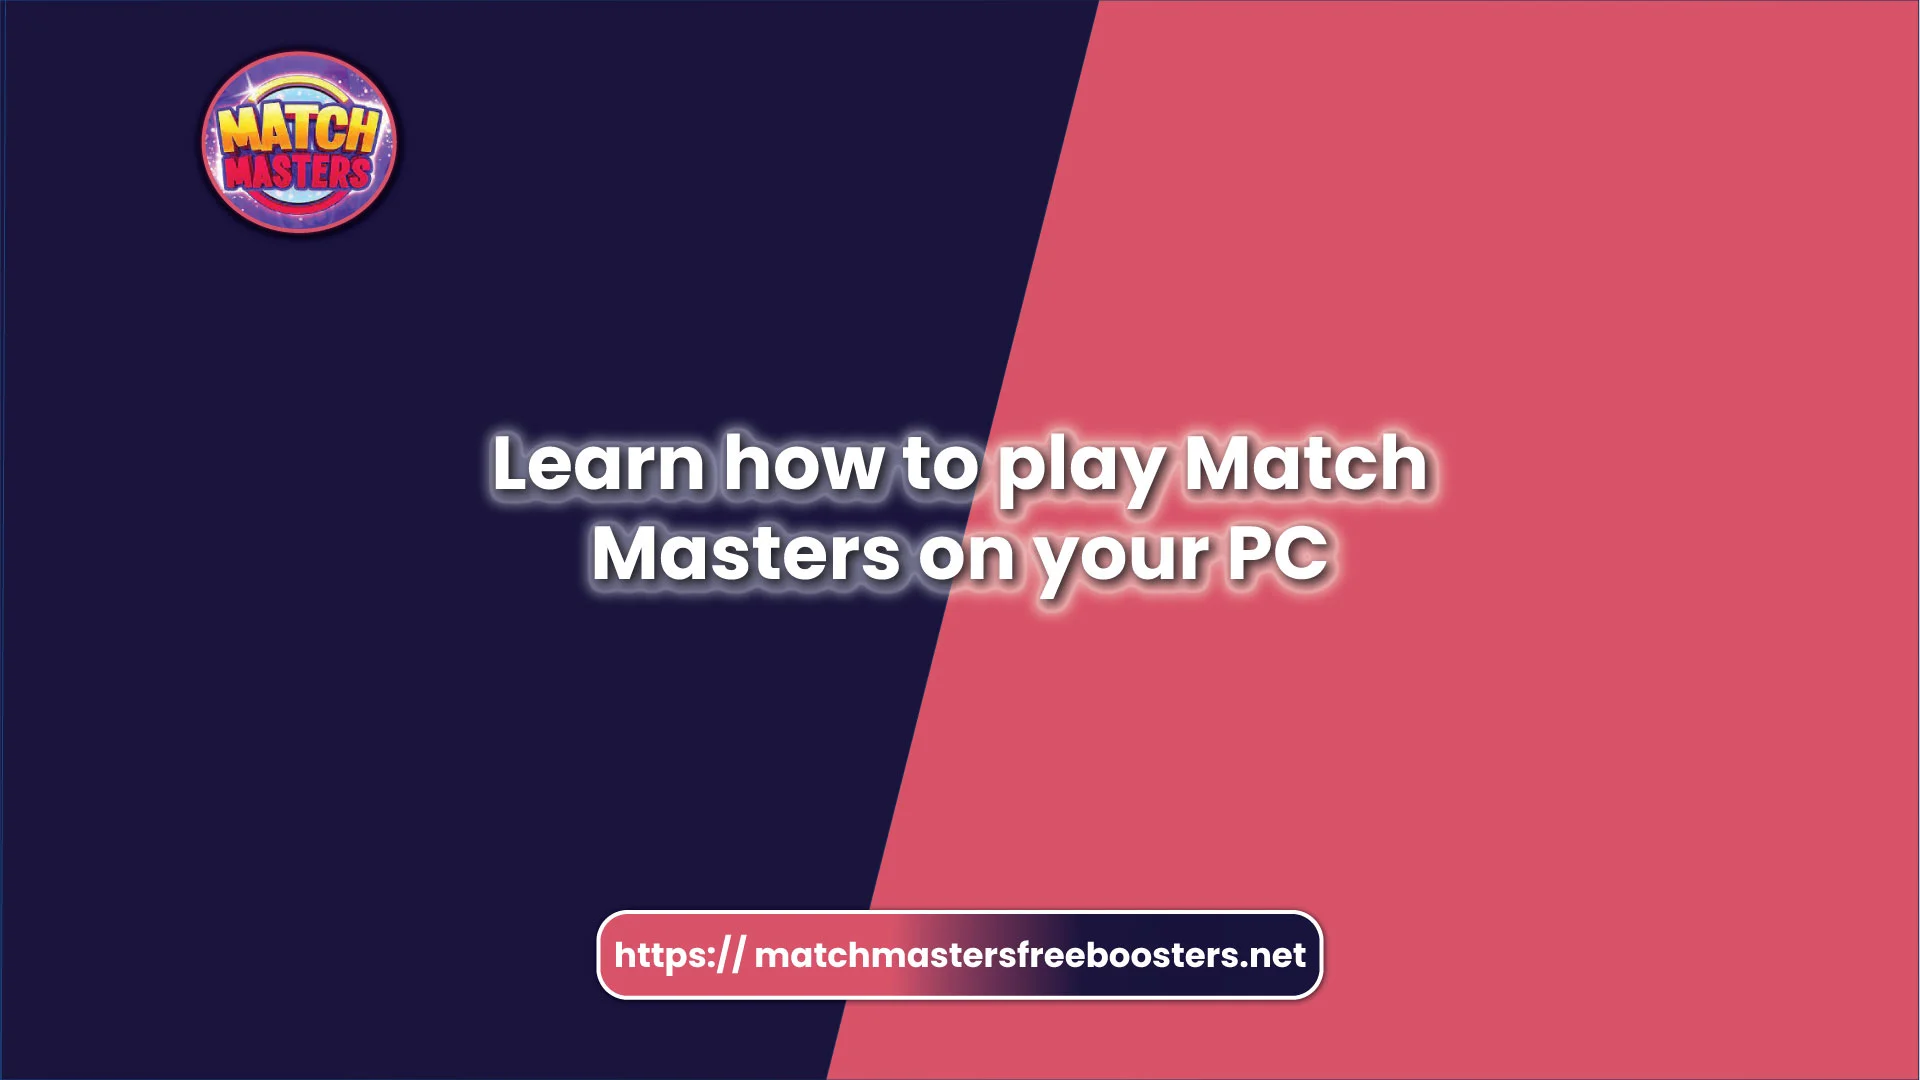 Guide to Playing Match Masters on PC